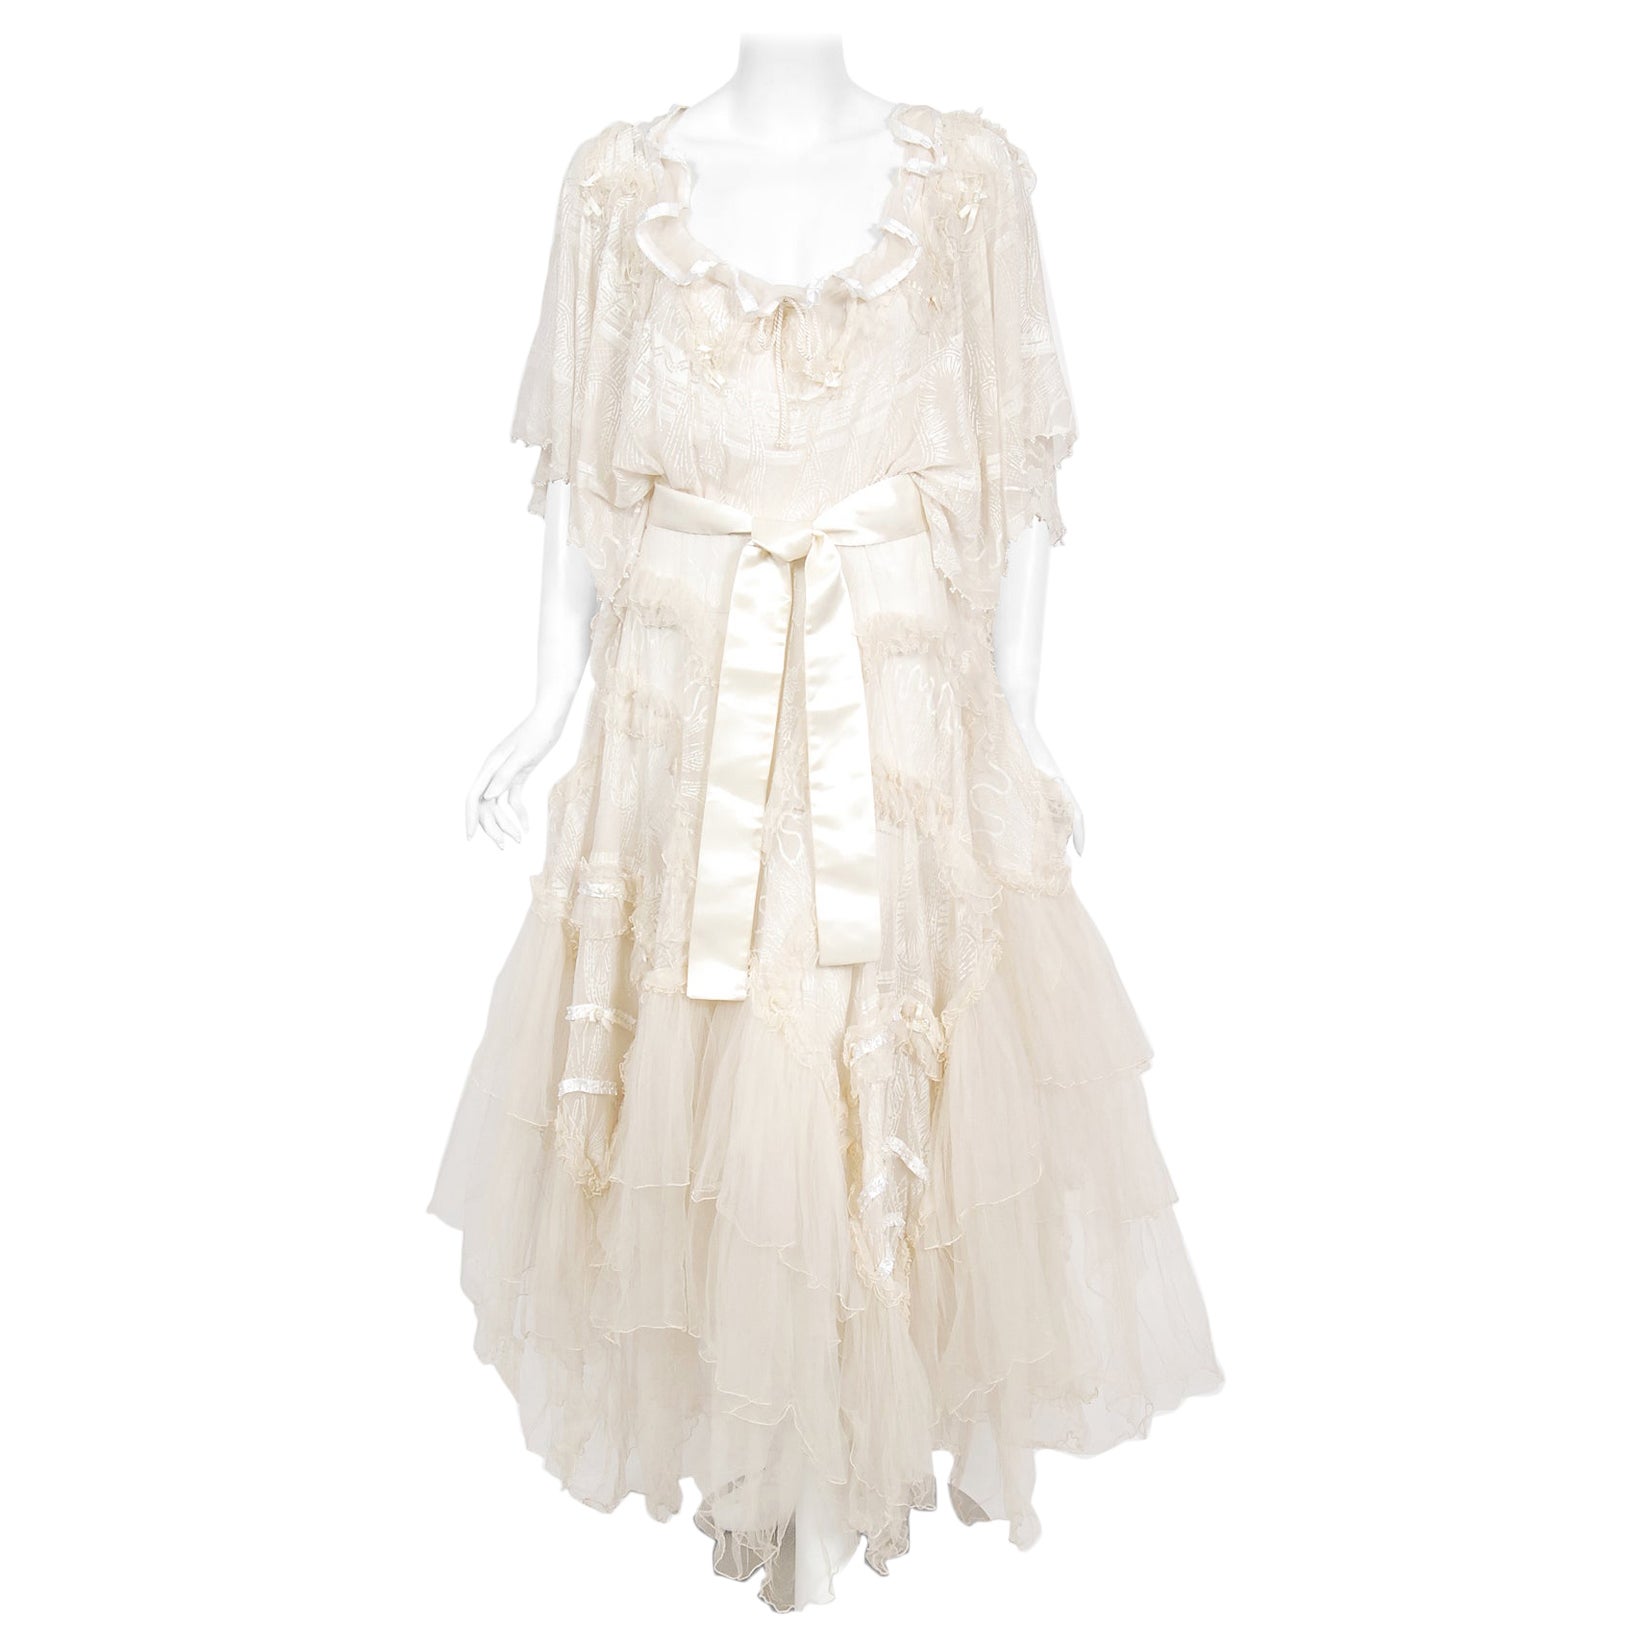 Vintage 1973 Zandra Rhodes Couture Hand Painted Ivory Sheer Chiffon & Tulle Gown